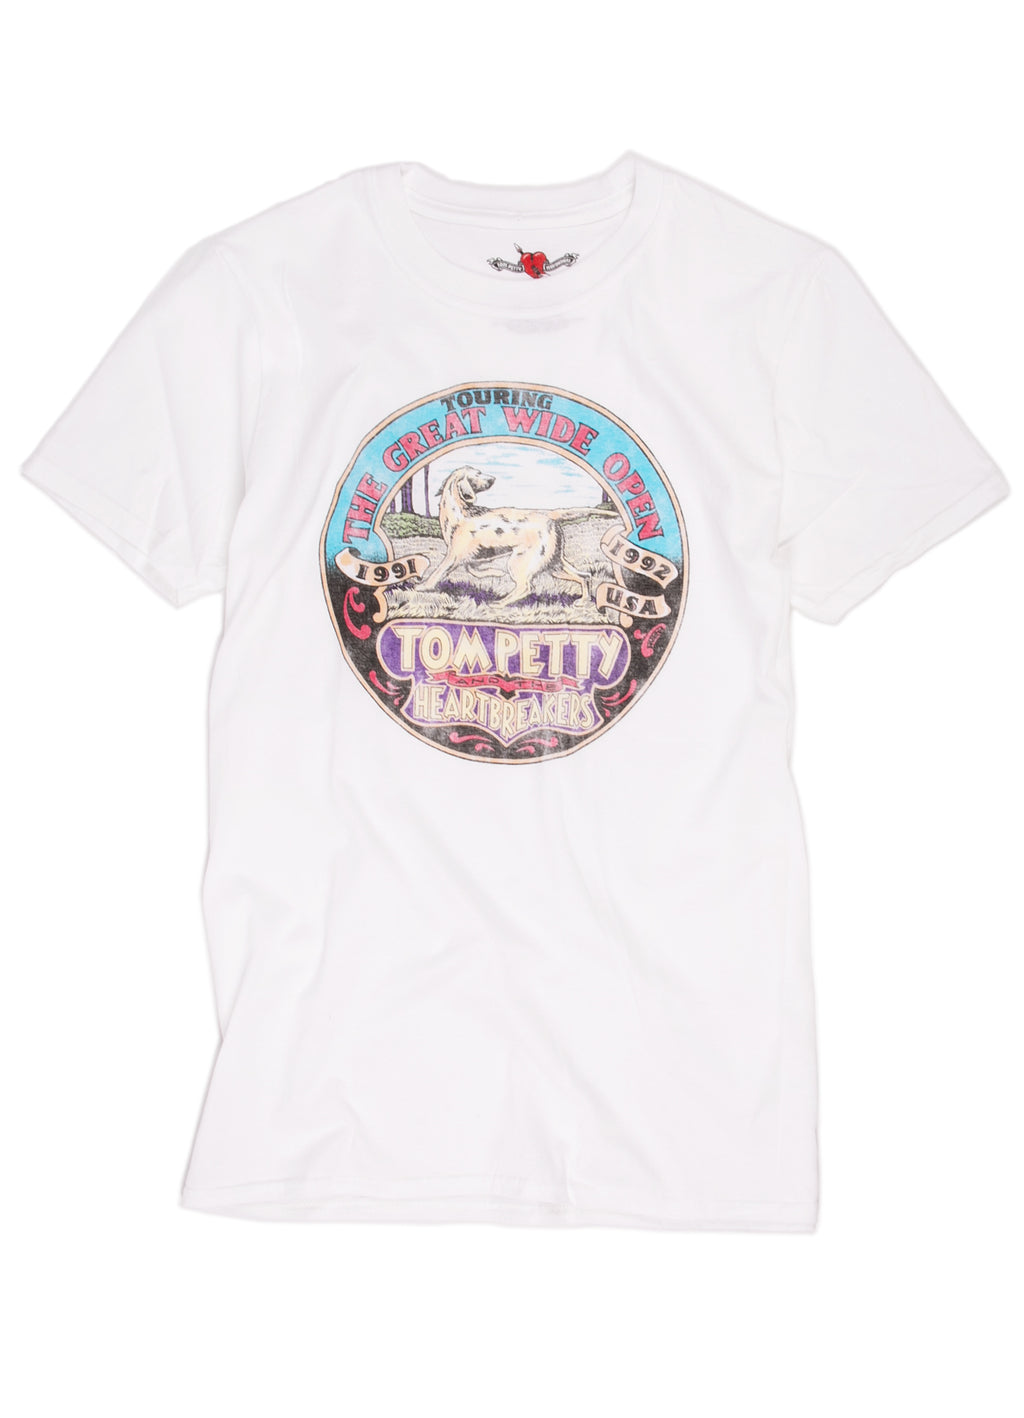 Tom Petty & The Heartbreakers "The Great Wide Open" t-shirt.